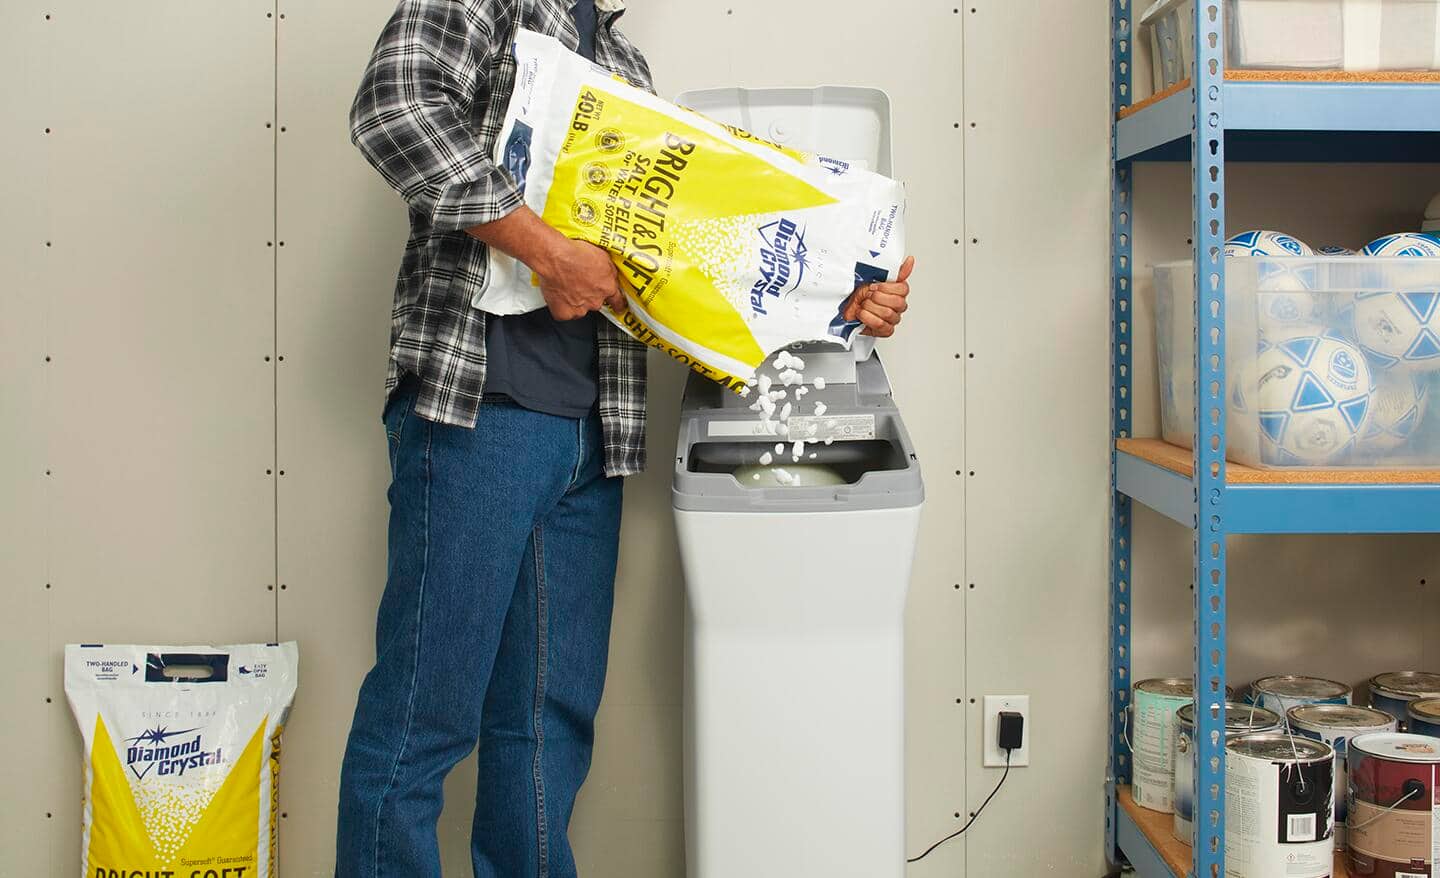 A person adds water softener salt to a water softener tank.